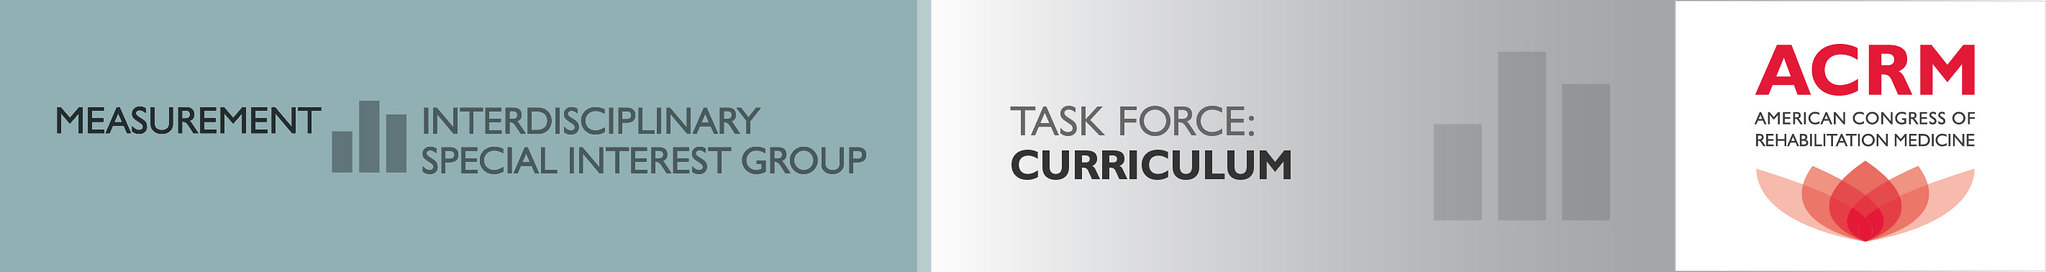 ACRM Measurement ISIG Curriculum Task Force banner